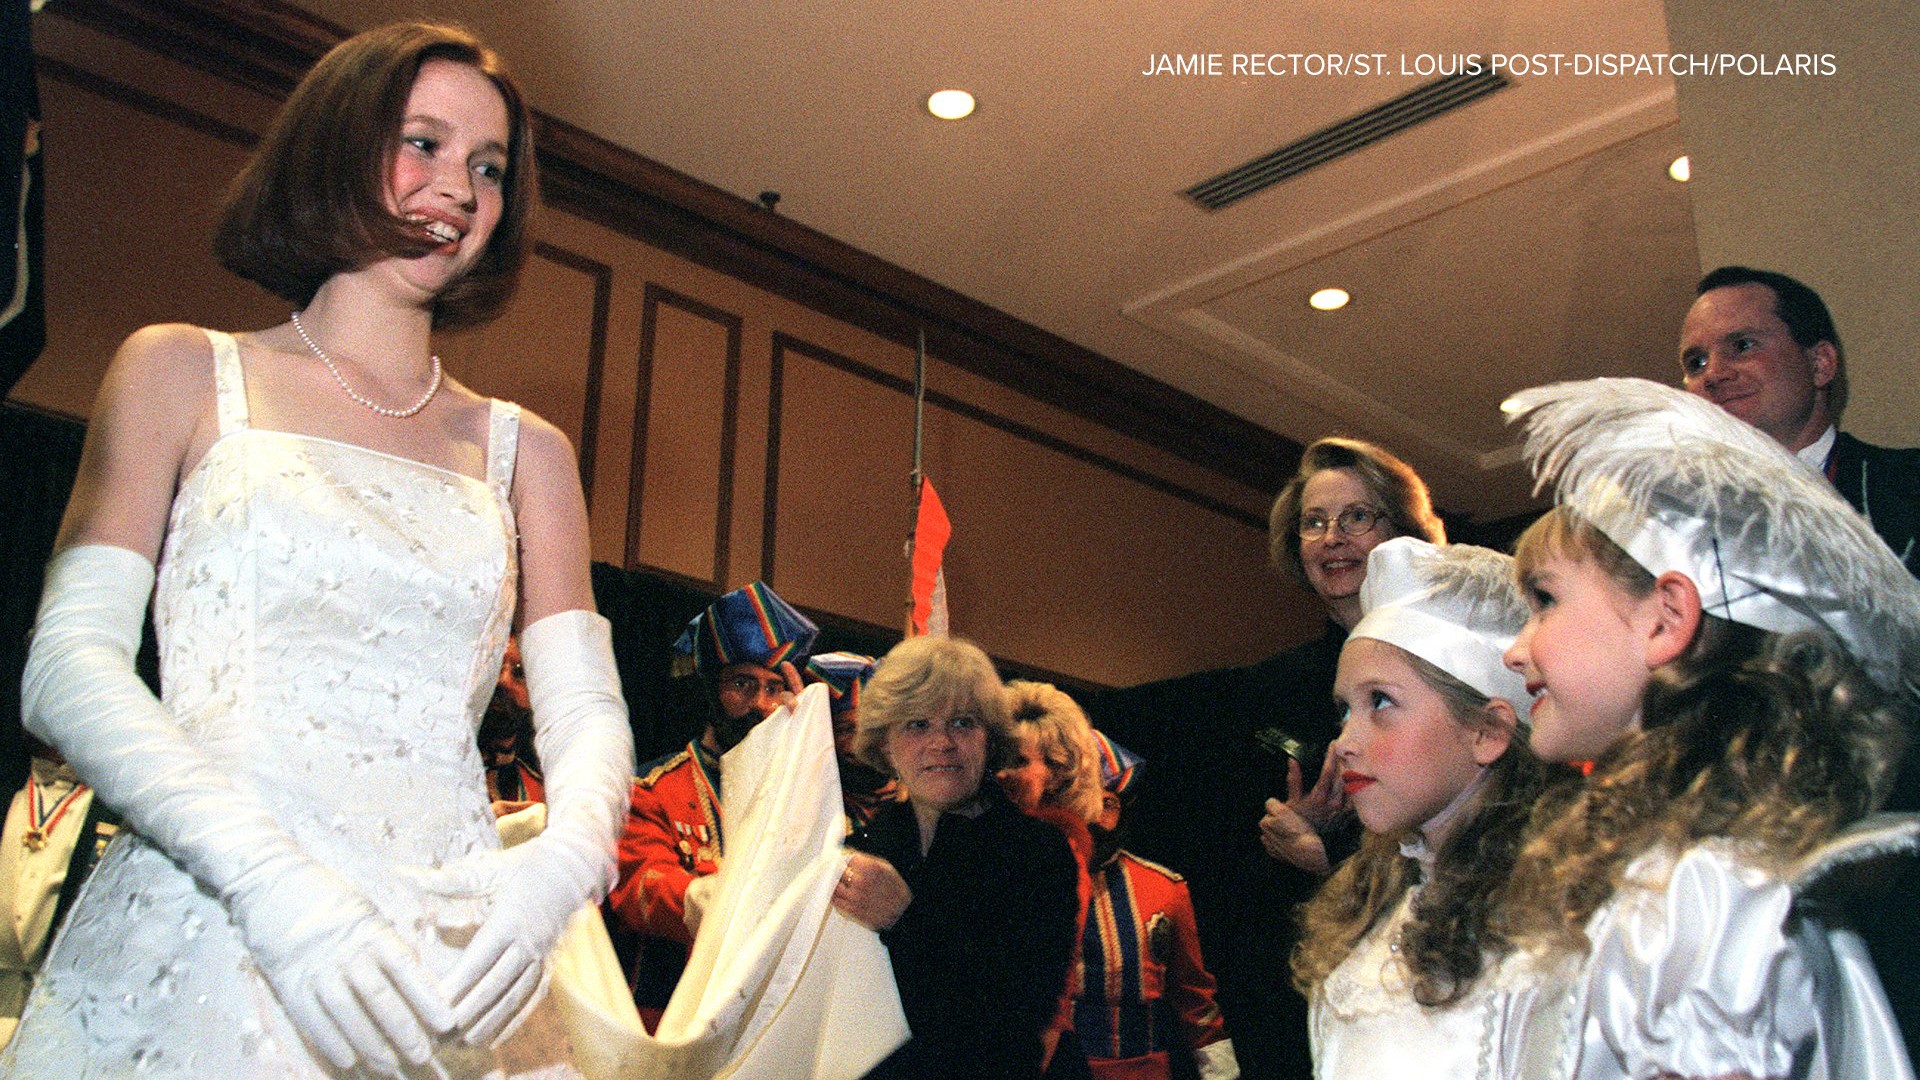 The Veiled Prophet is one of the oldest organizations in St. Louis, and Kemper was named its debutante queen in 1999